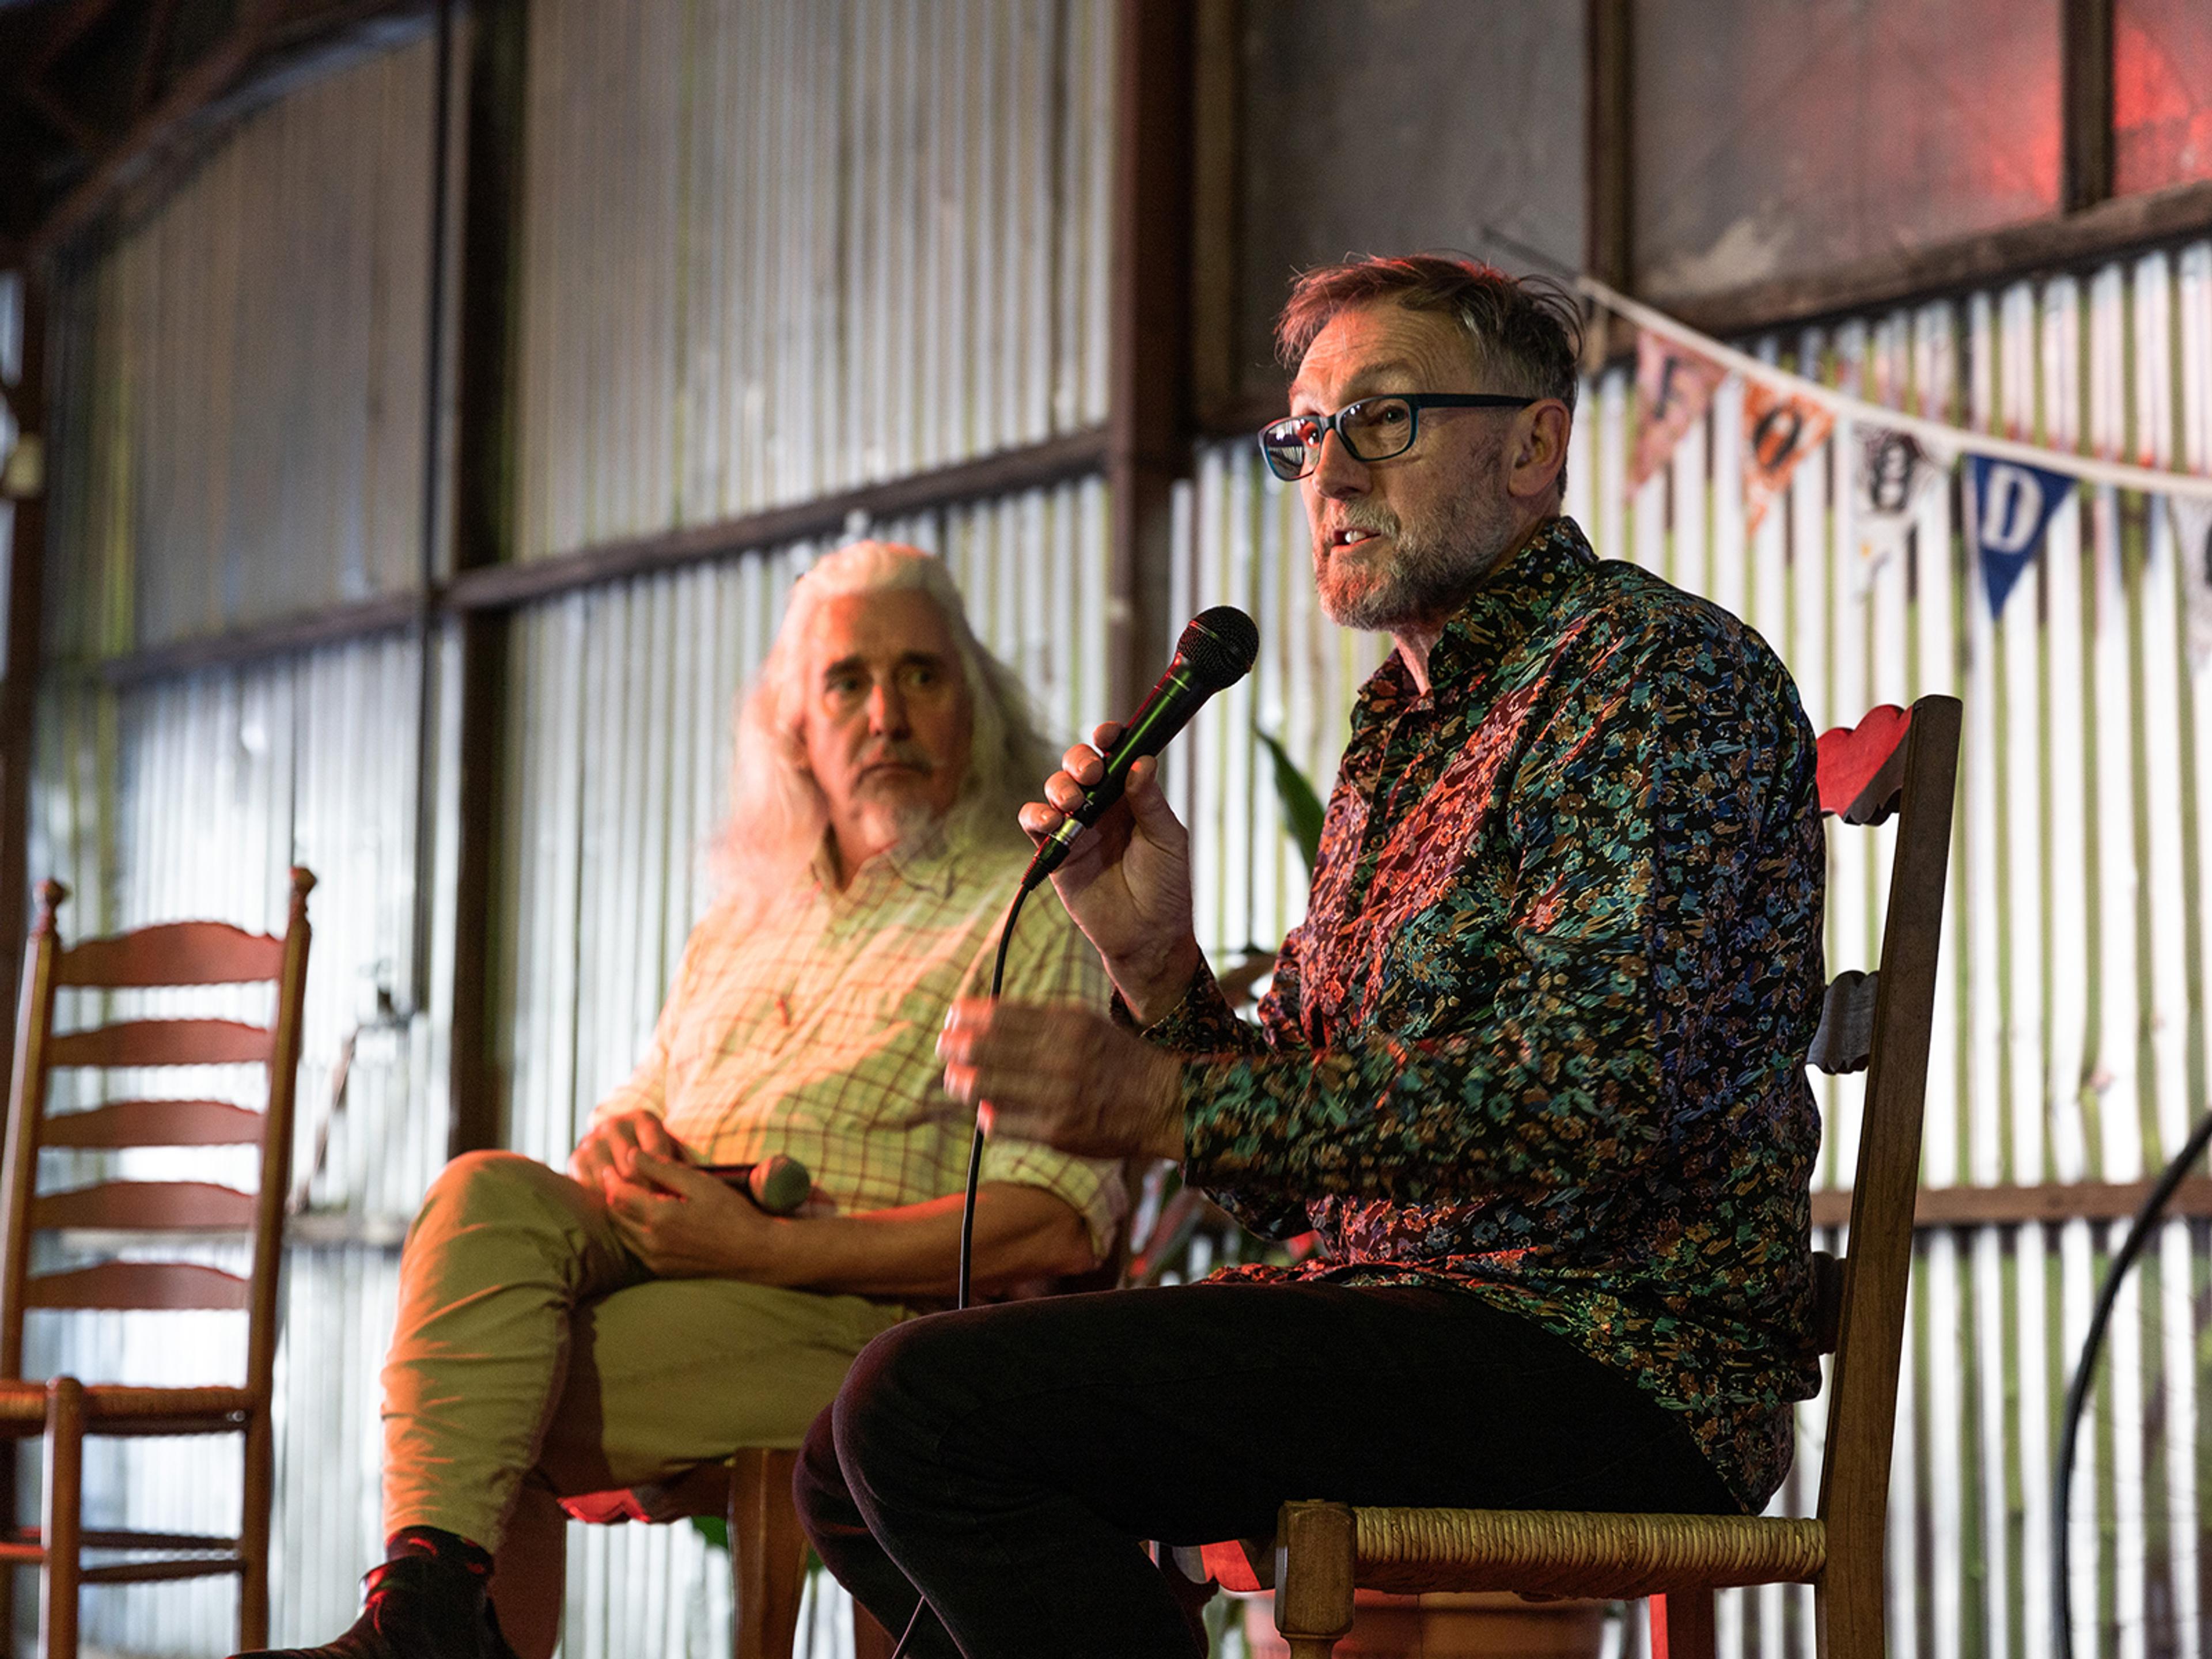 Two people on stage speaking at an event in the Food Connect Shed.